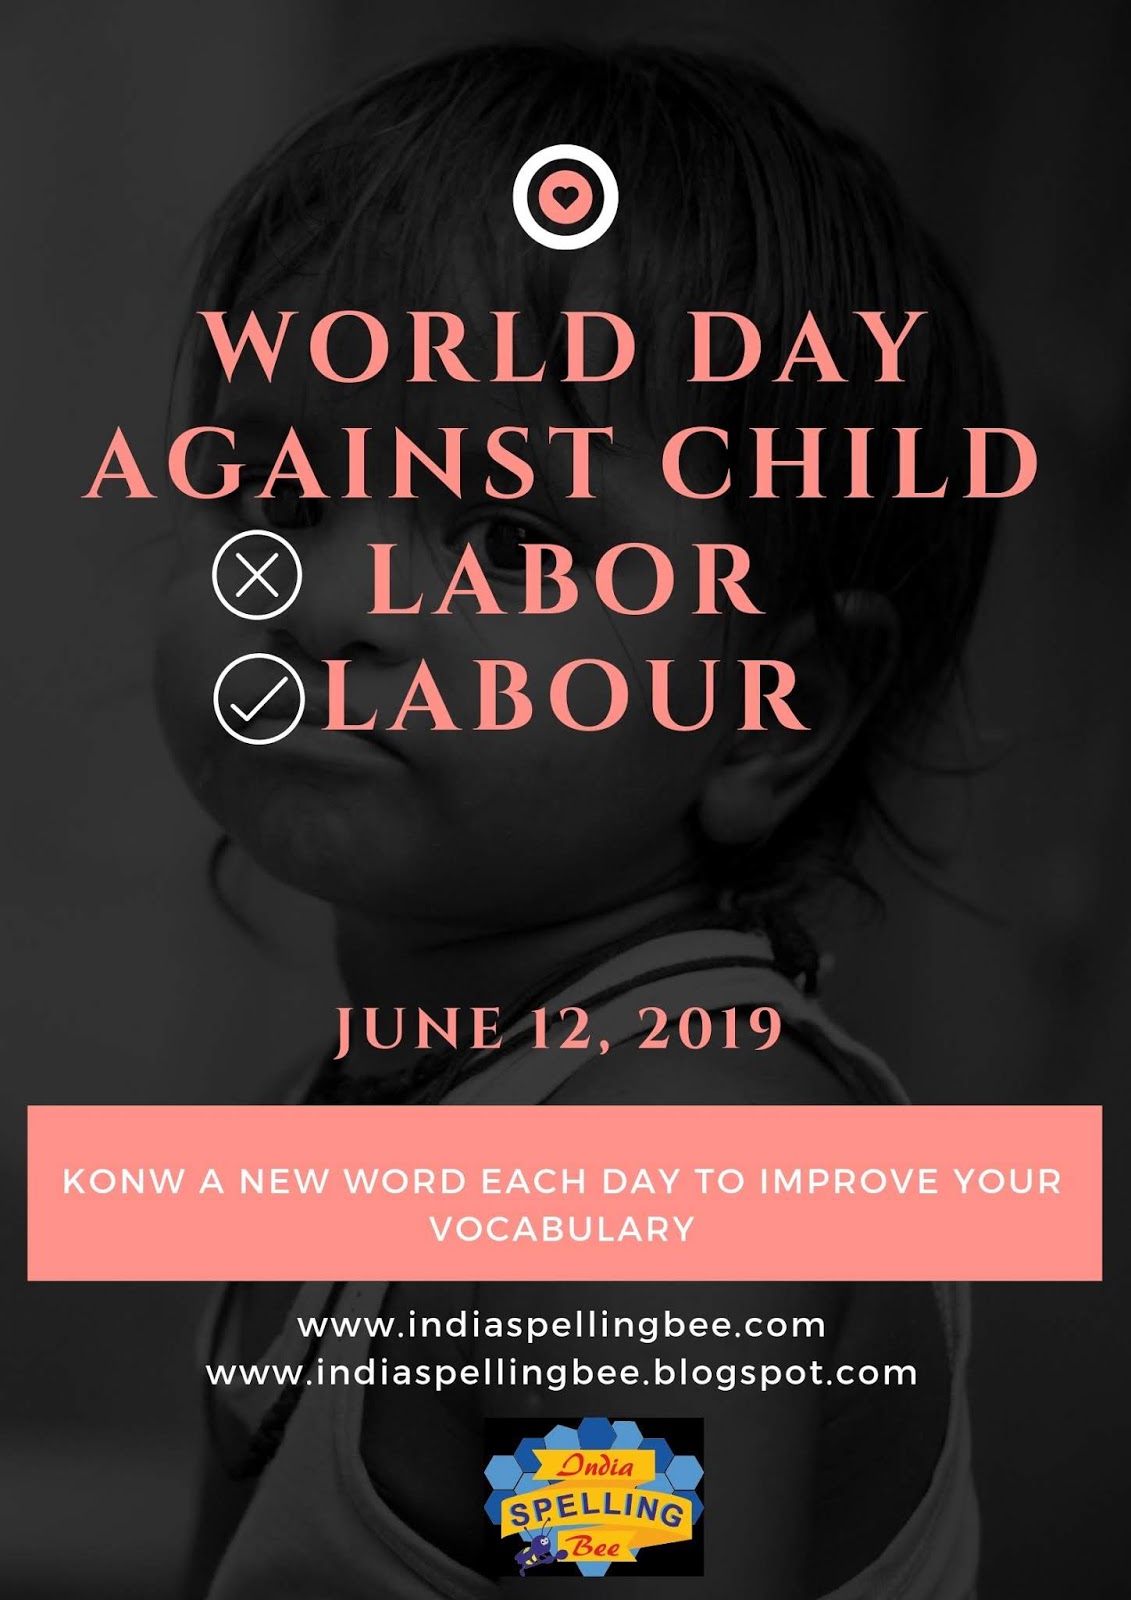 India Spelling Bee World Day Against Chlld Labour June 12